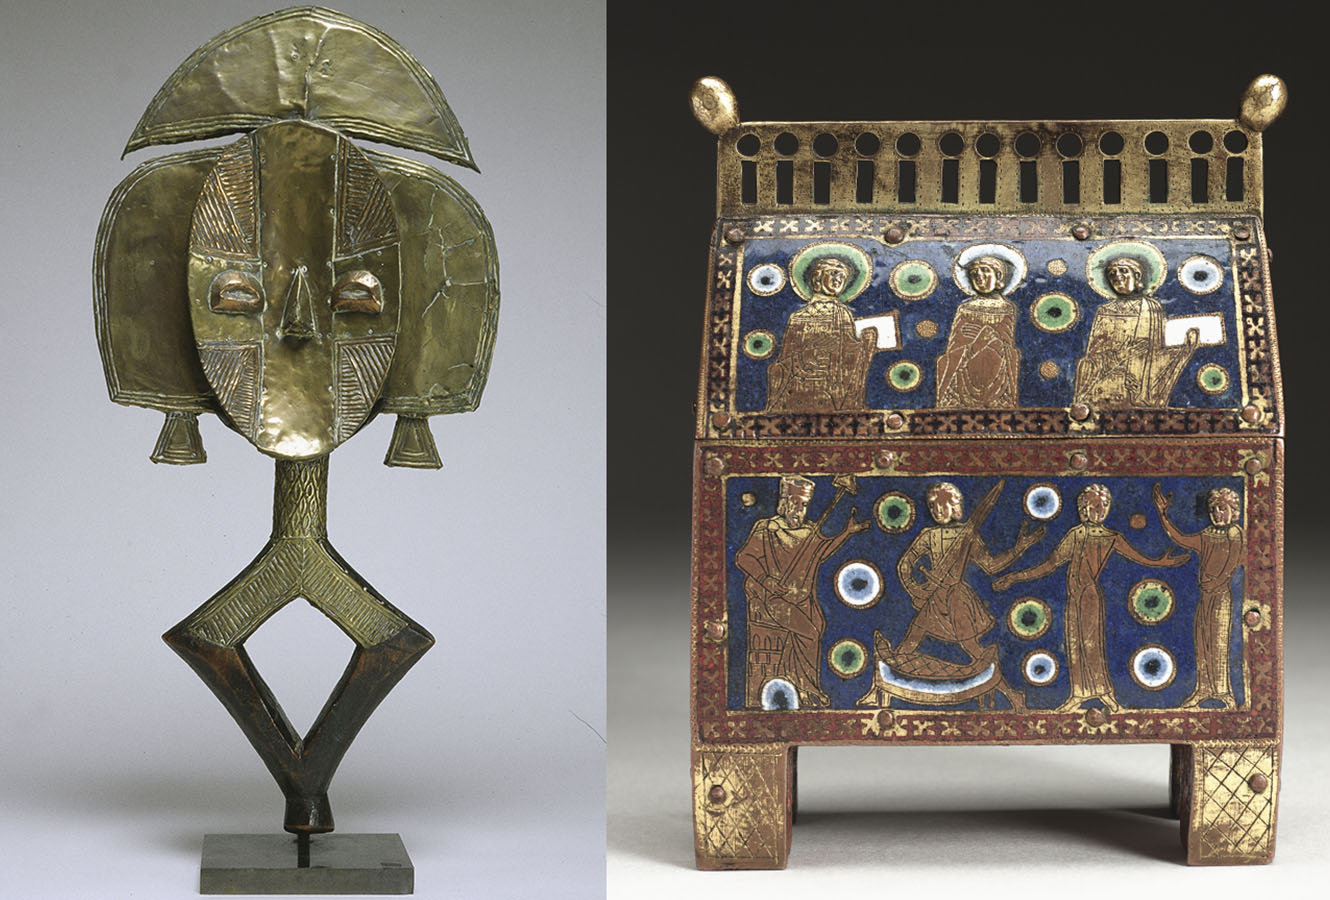 Brass sculpture of an abstract figure. Reliquary decorated with religious figures in enamel. 